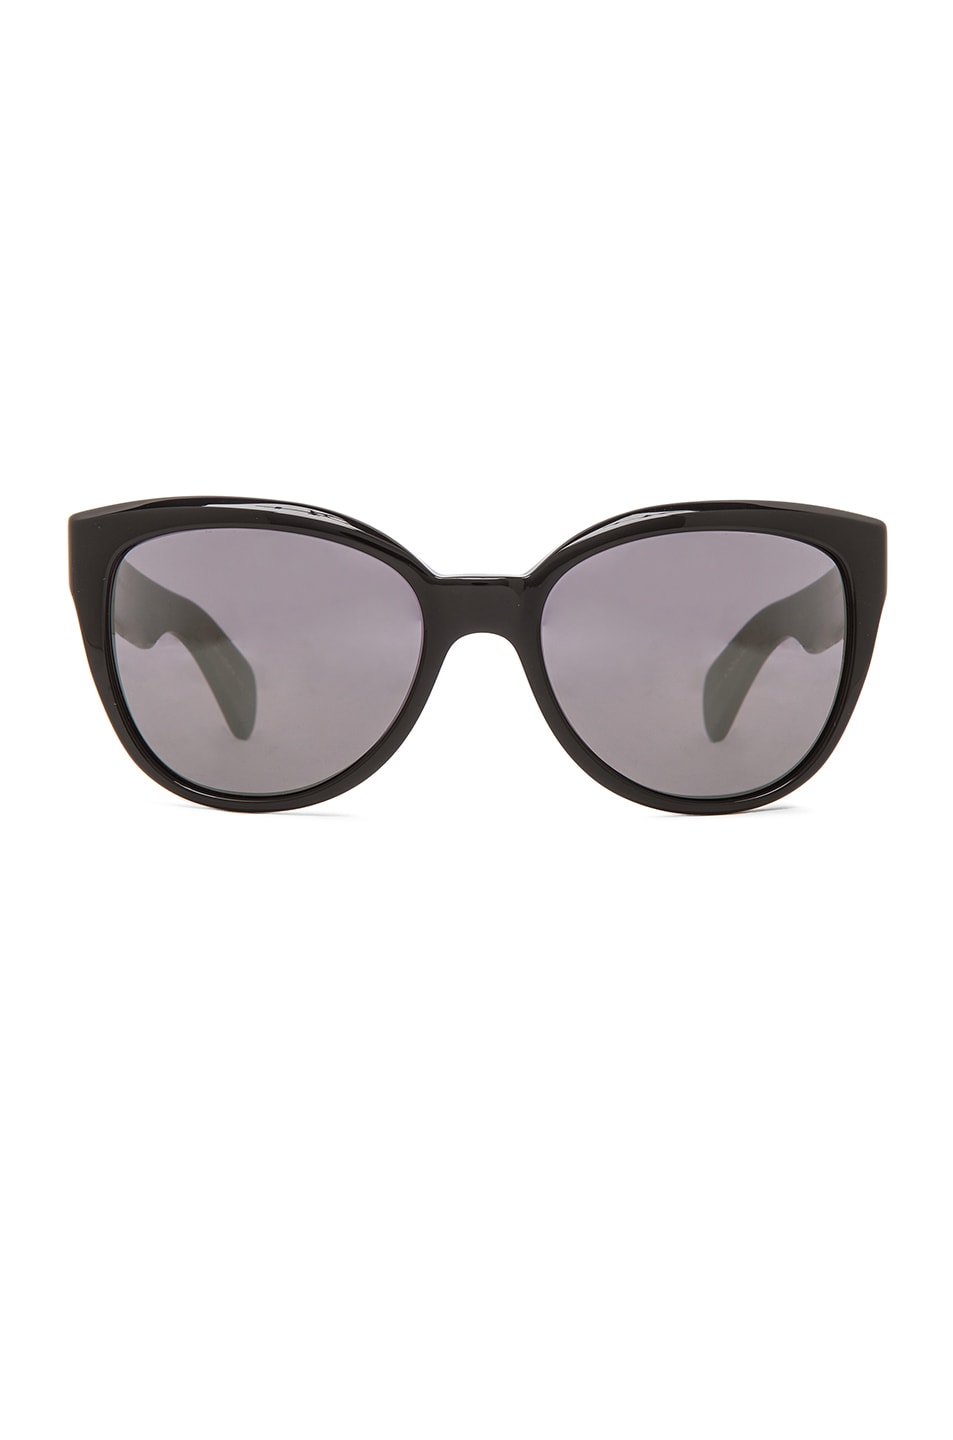 Image 1 of Oliver Peoples Custom Abrie Sunglasses in Black & Caviar Mirror